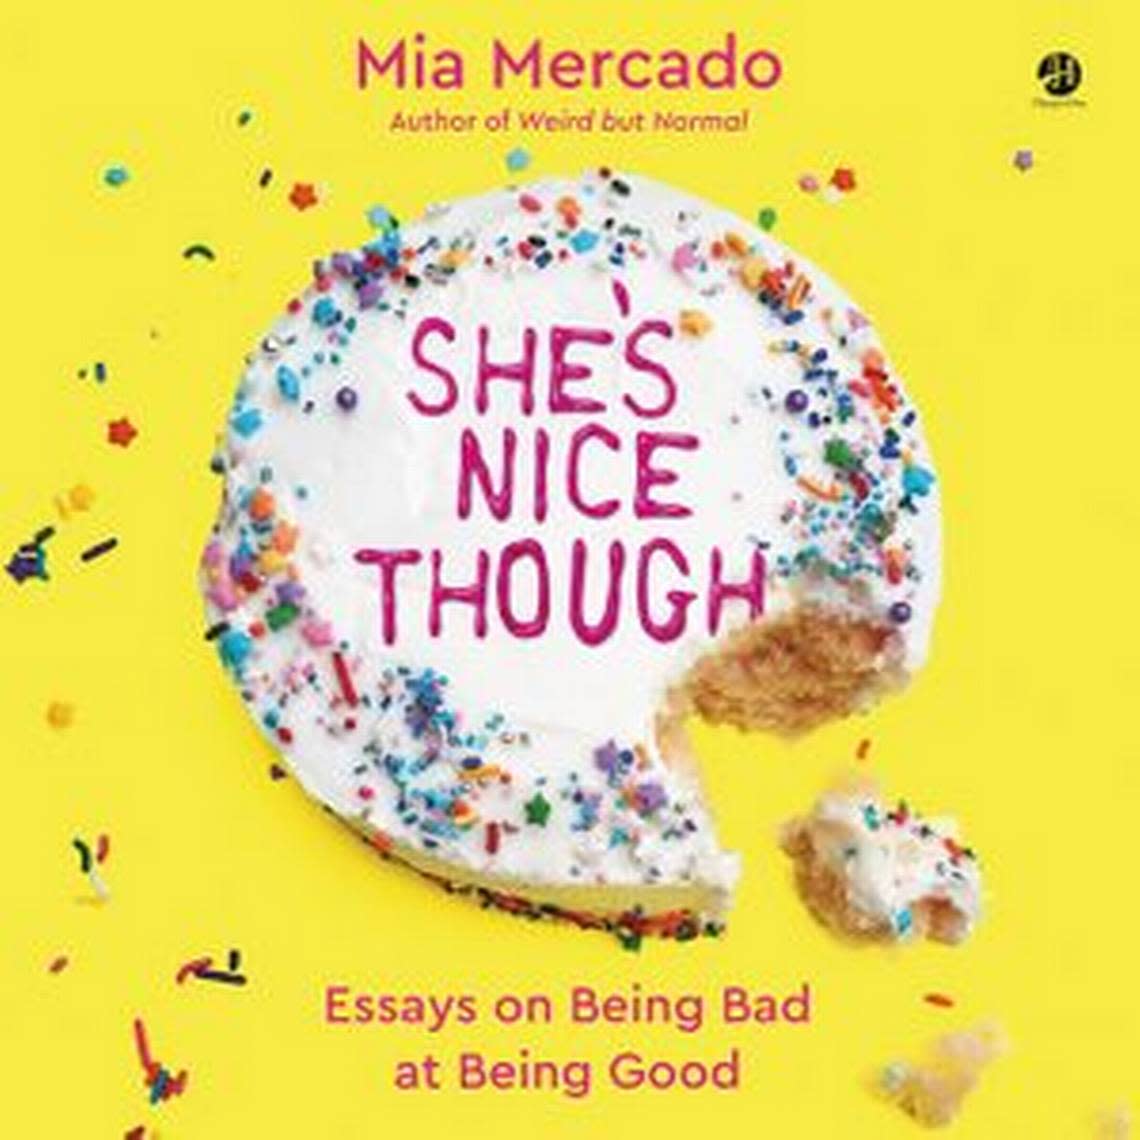 “She’s Nice Though: Essays on Being Bad at Being Good”